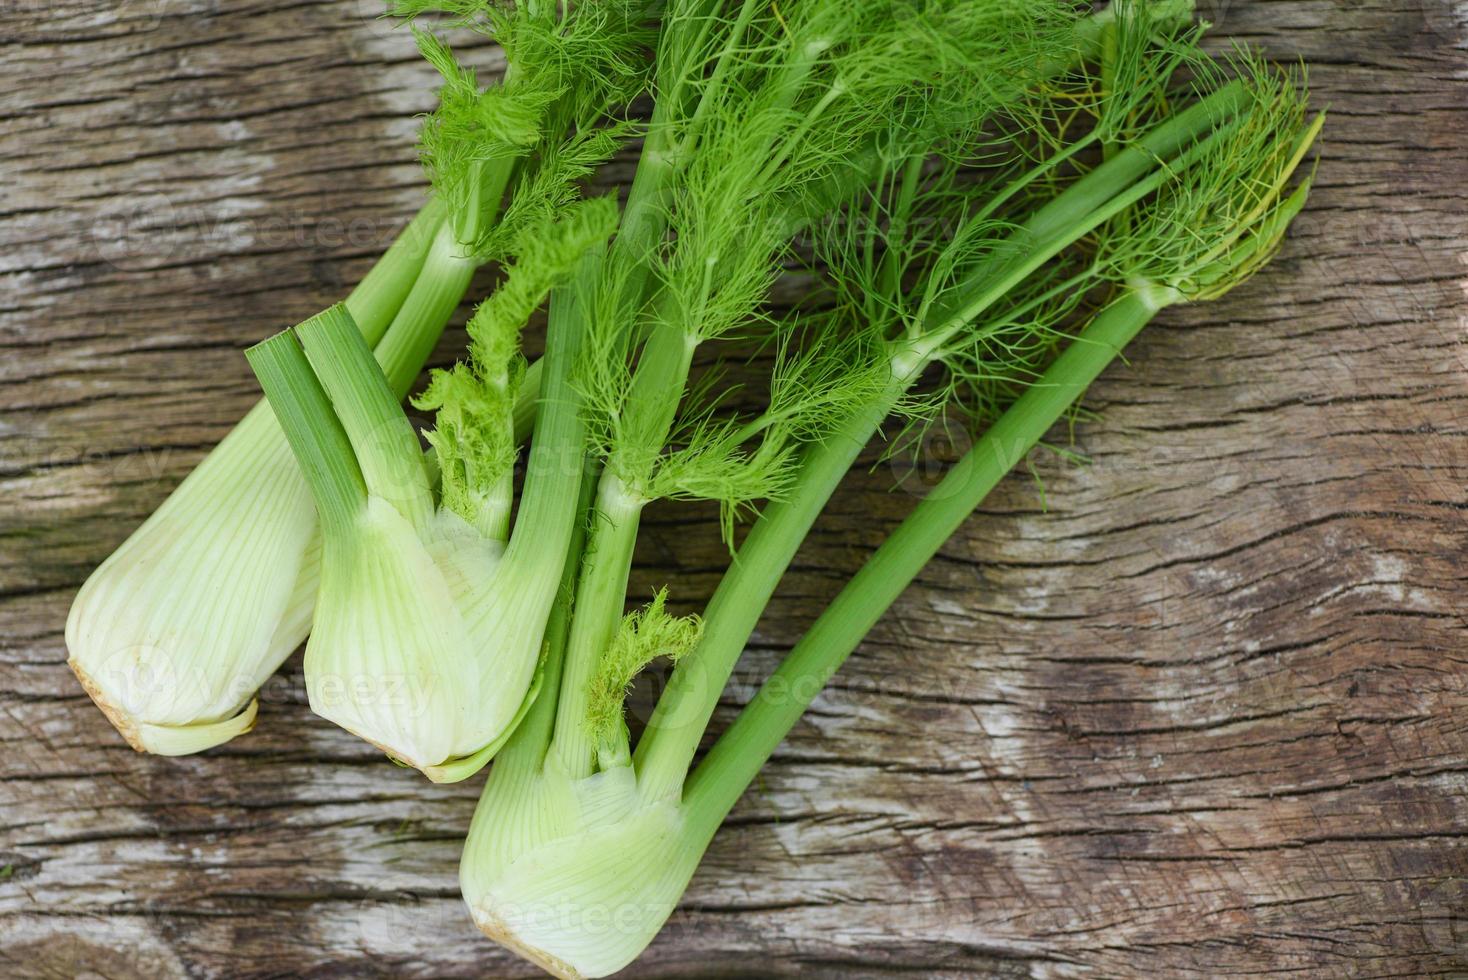 Fennel vegetable from the garden , Fresh raw fennel bulbs ready to cook on food wooden kitchen background. photo